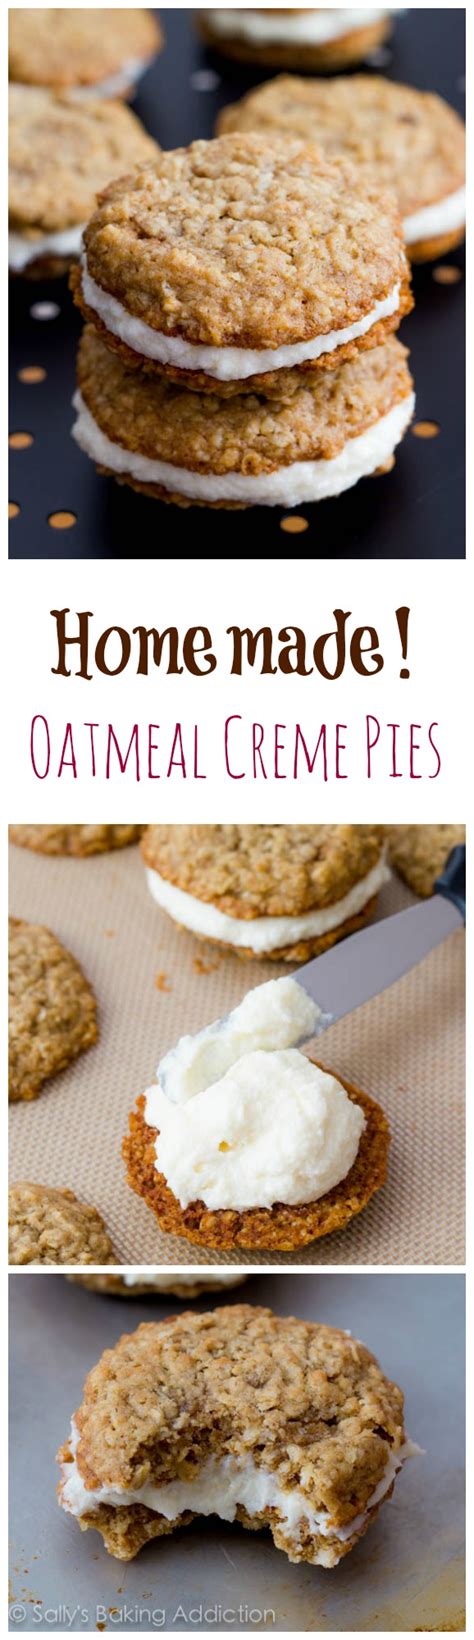 little debbie oatmeal creme pies are easy to make at home none of the artificial stuff and